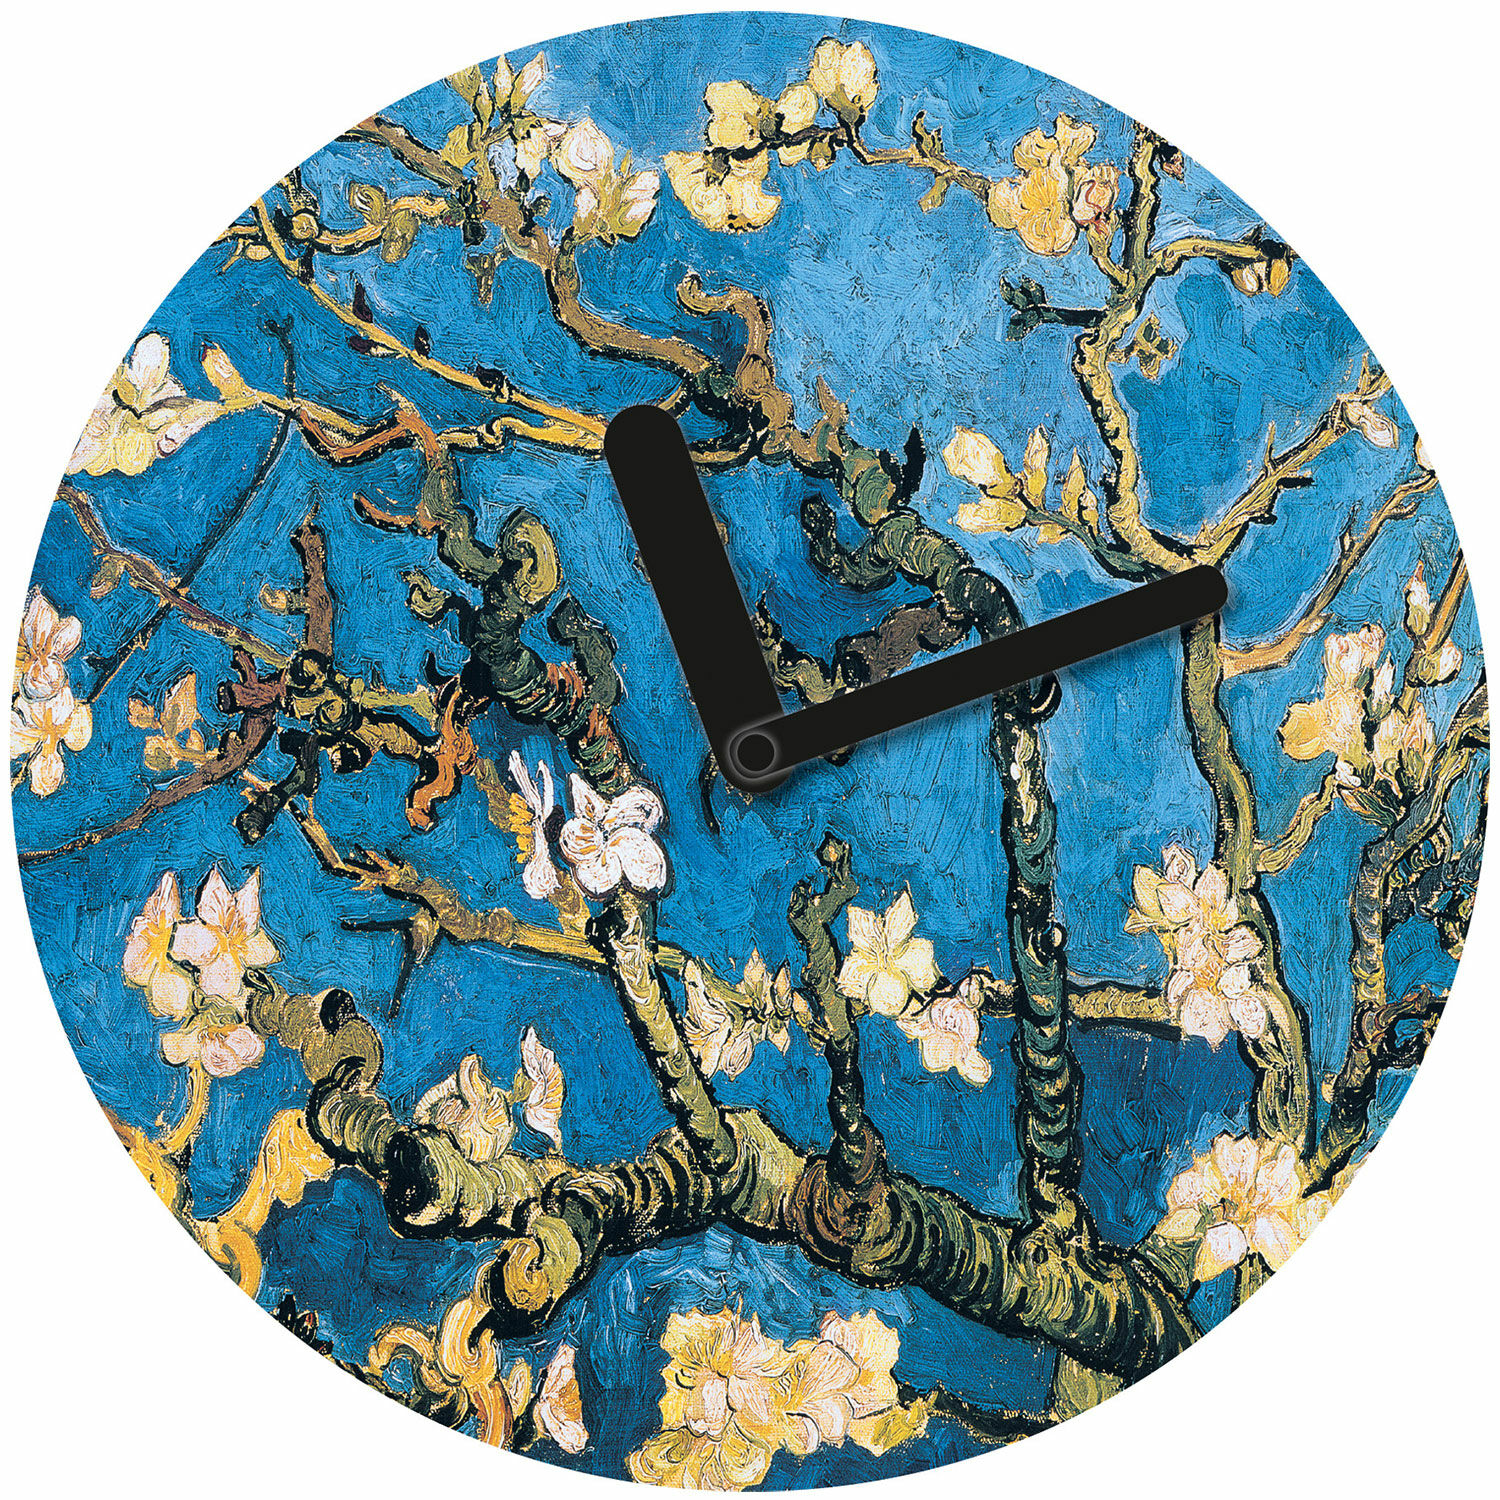 Wall clock "Almond Blossom" by Vincent van Gogh